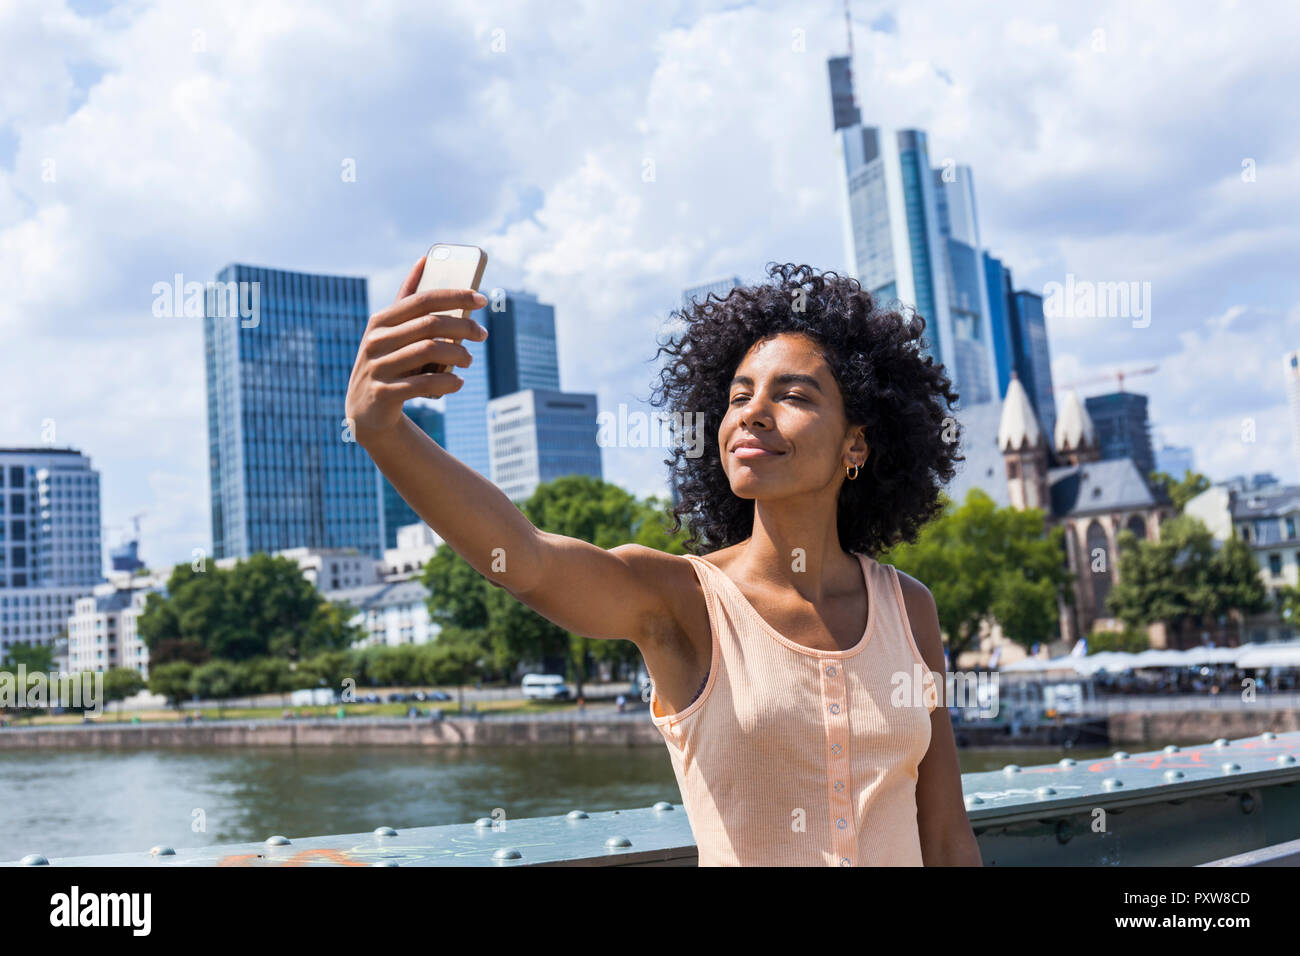 Germany, Frankfurt, portrait of content young woman with curly hair taking selfie in front of skyline Stock Photo